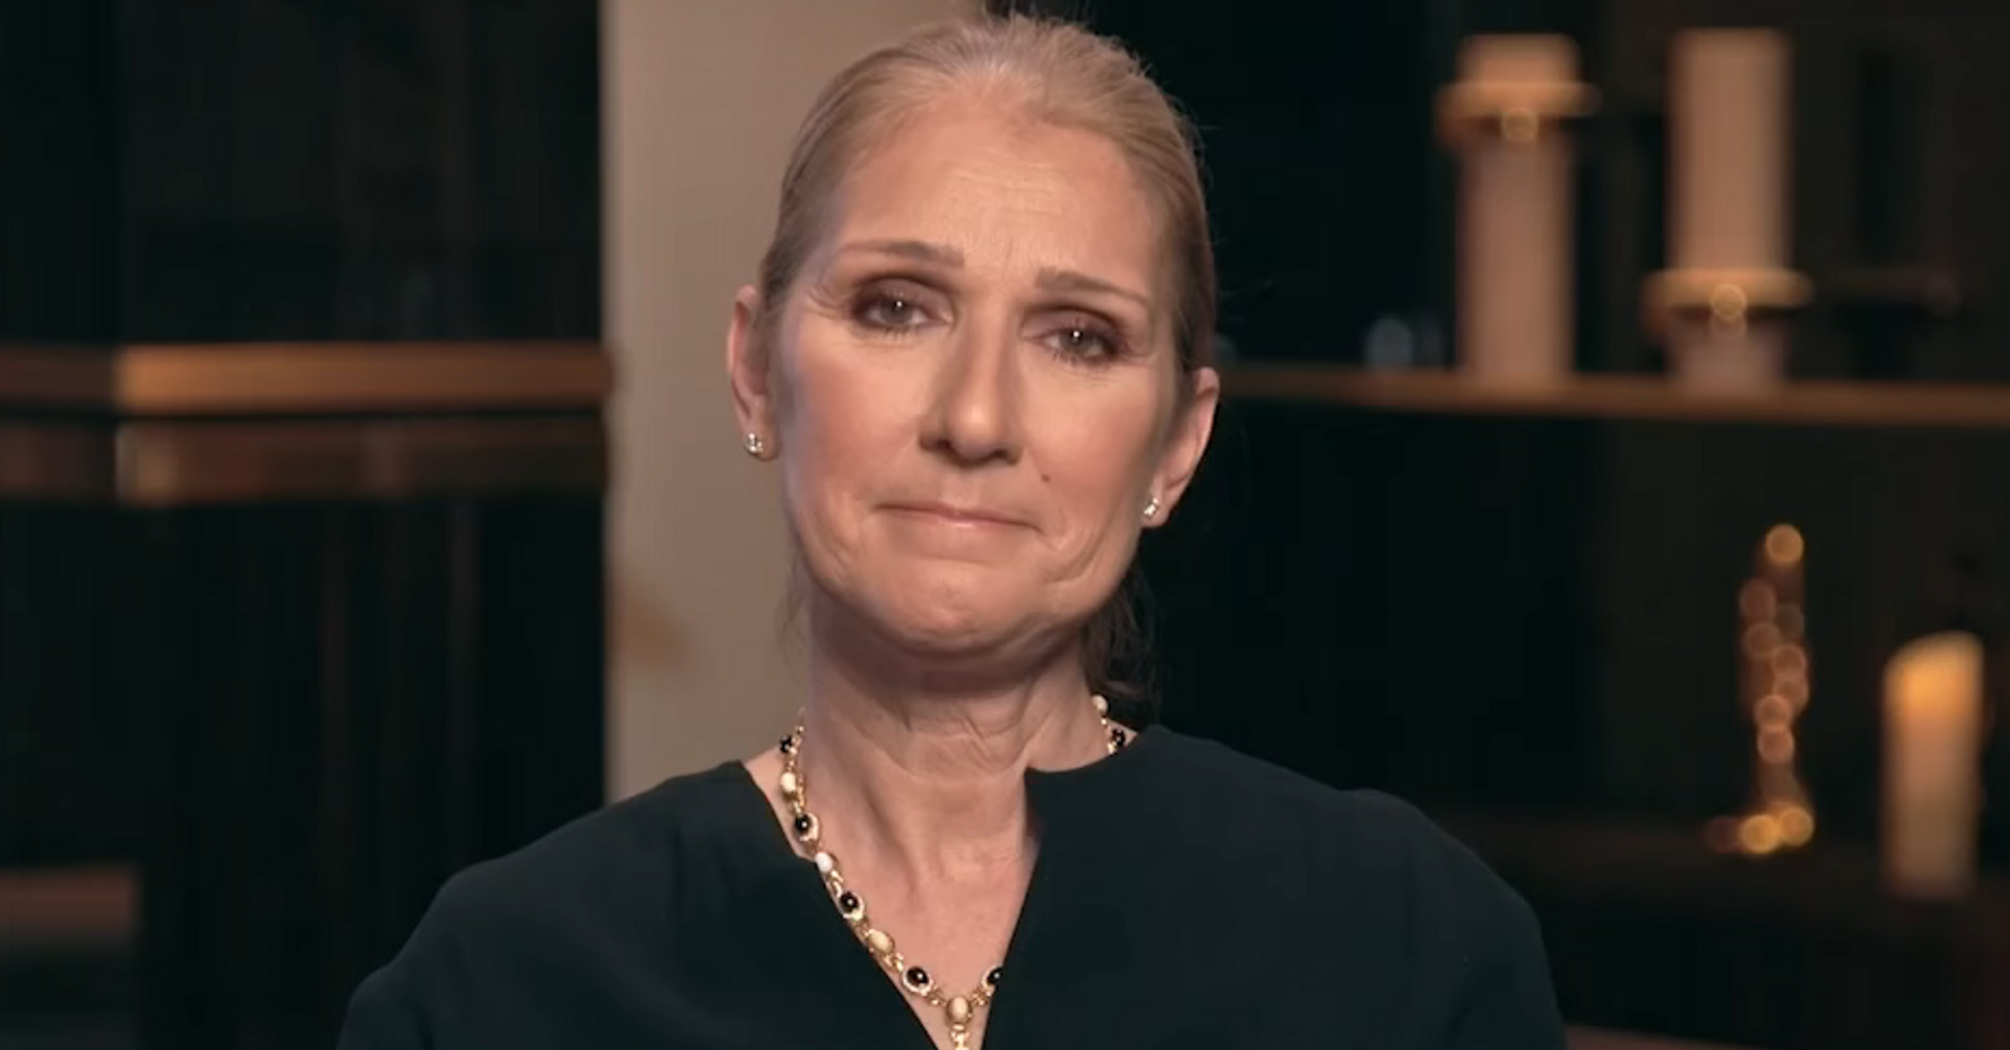 Deceased husband sends 'signs': terminally ill Celine Dion talks about life after diagnosis and help from 13-year-old sons